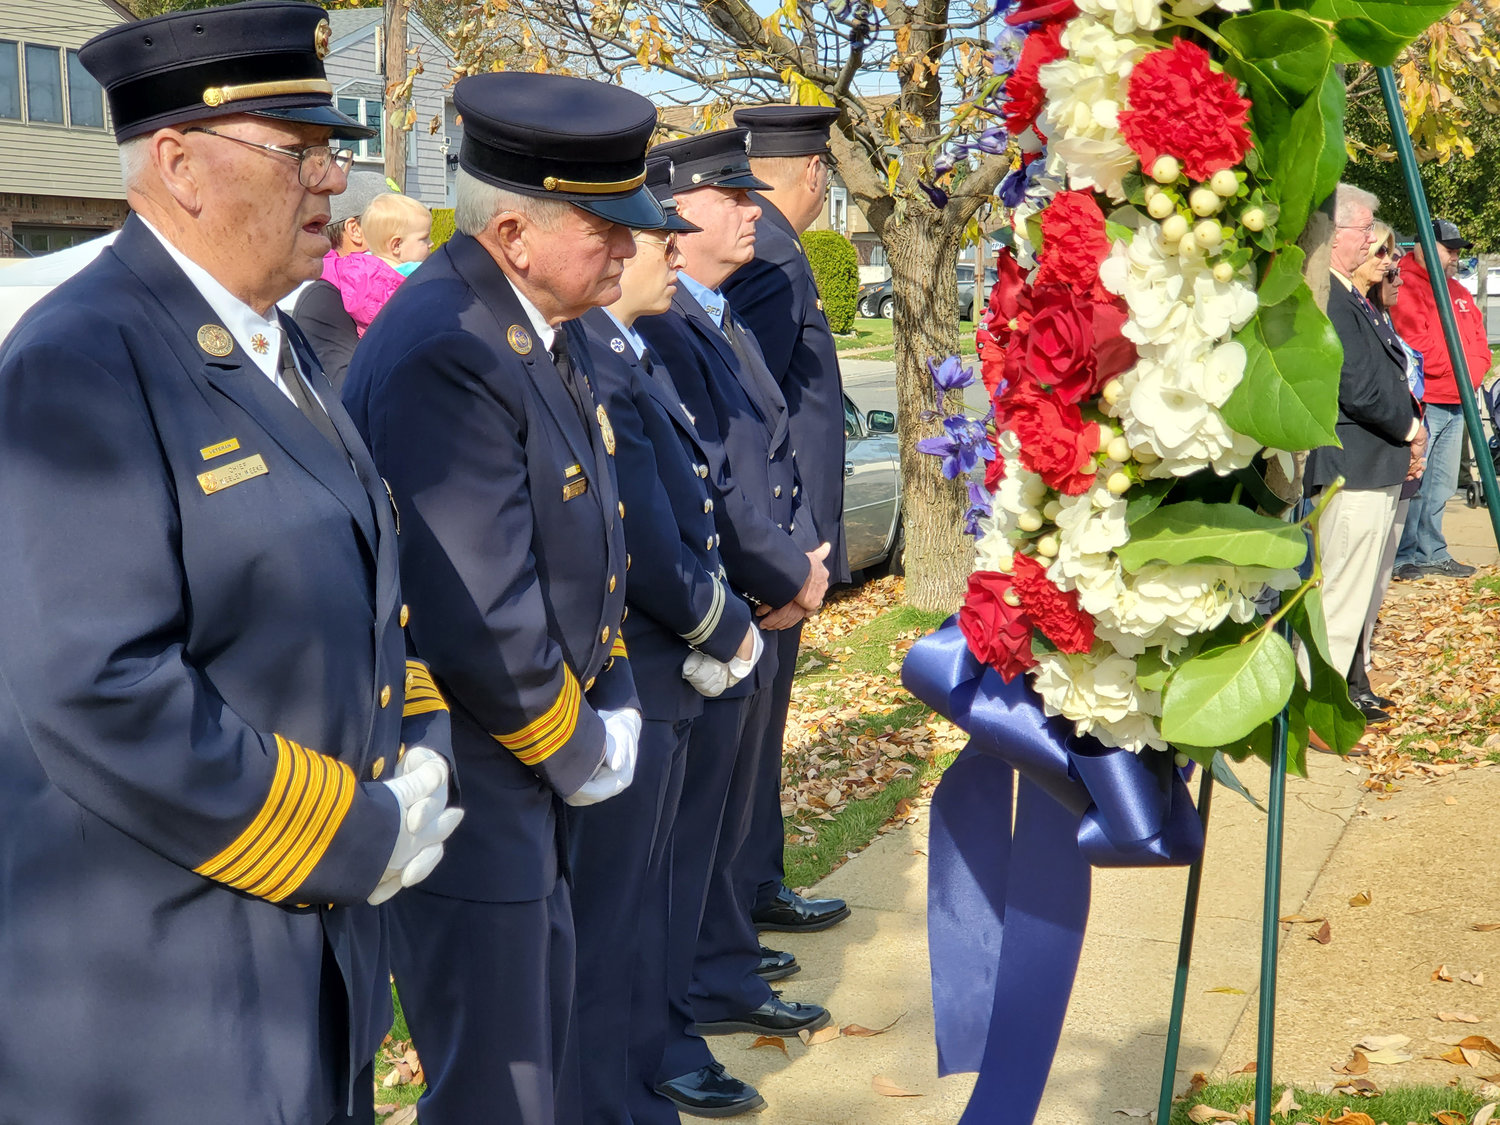 Seaford Fire Department representatives watched on as the ceremonies unfolded.